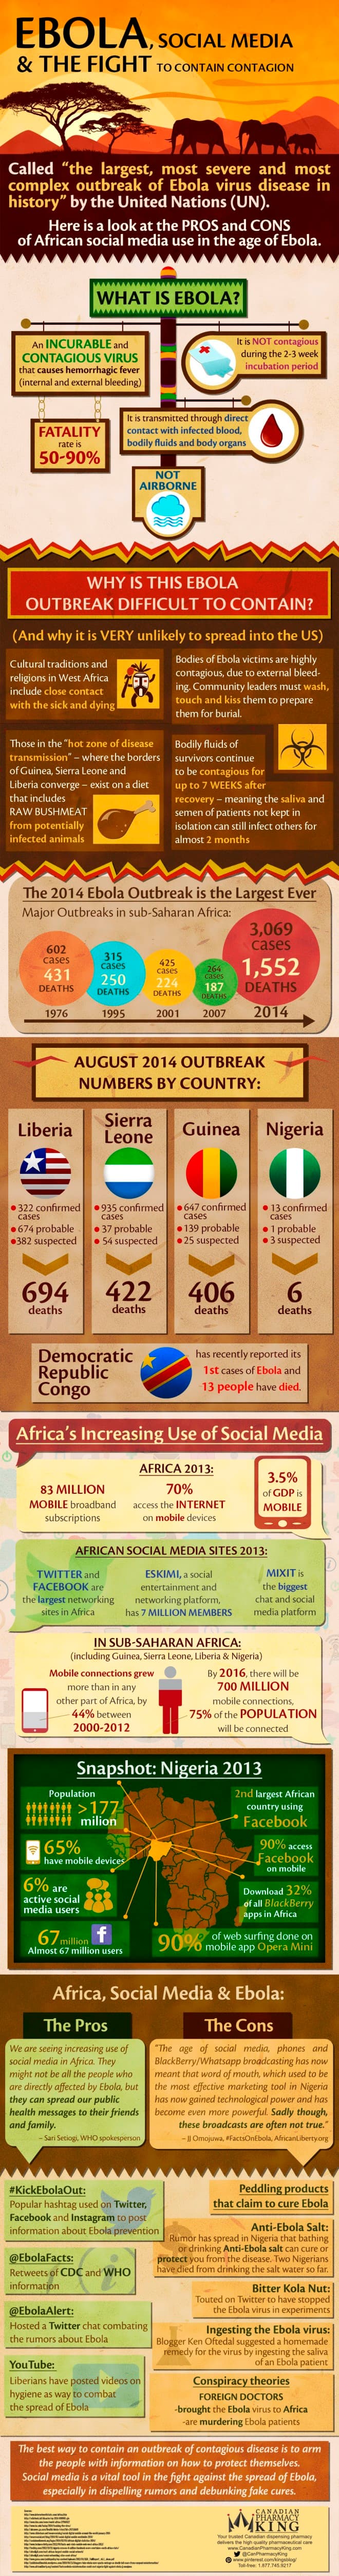 Infographic Ebola, Social Media & The Fight To Contain Contagion